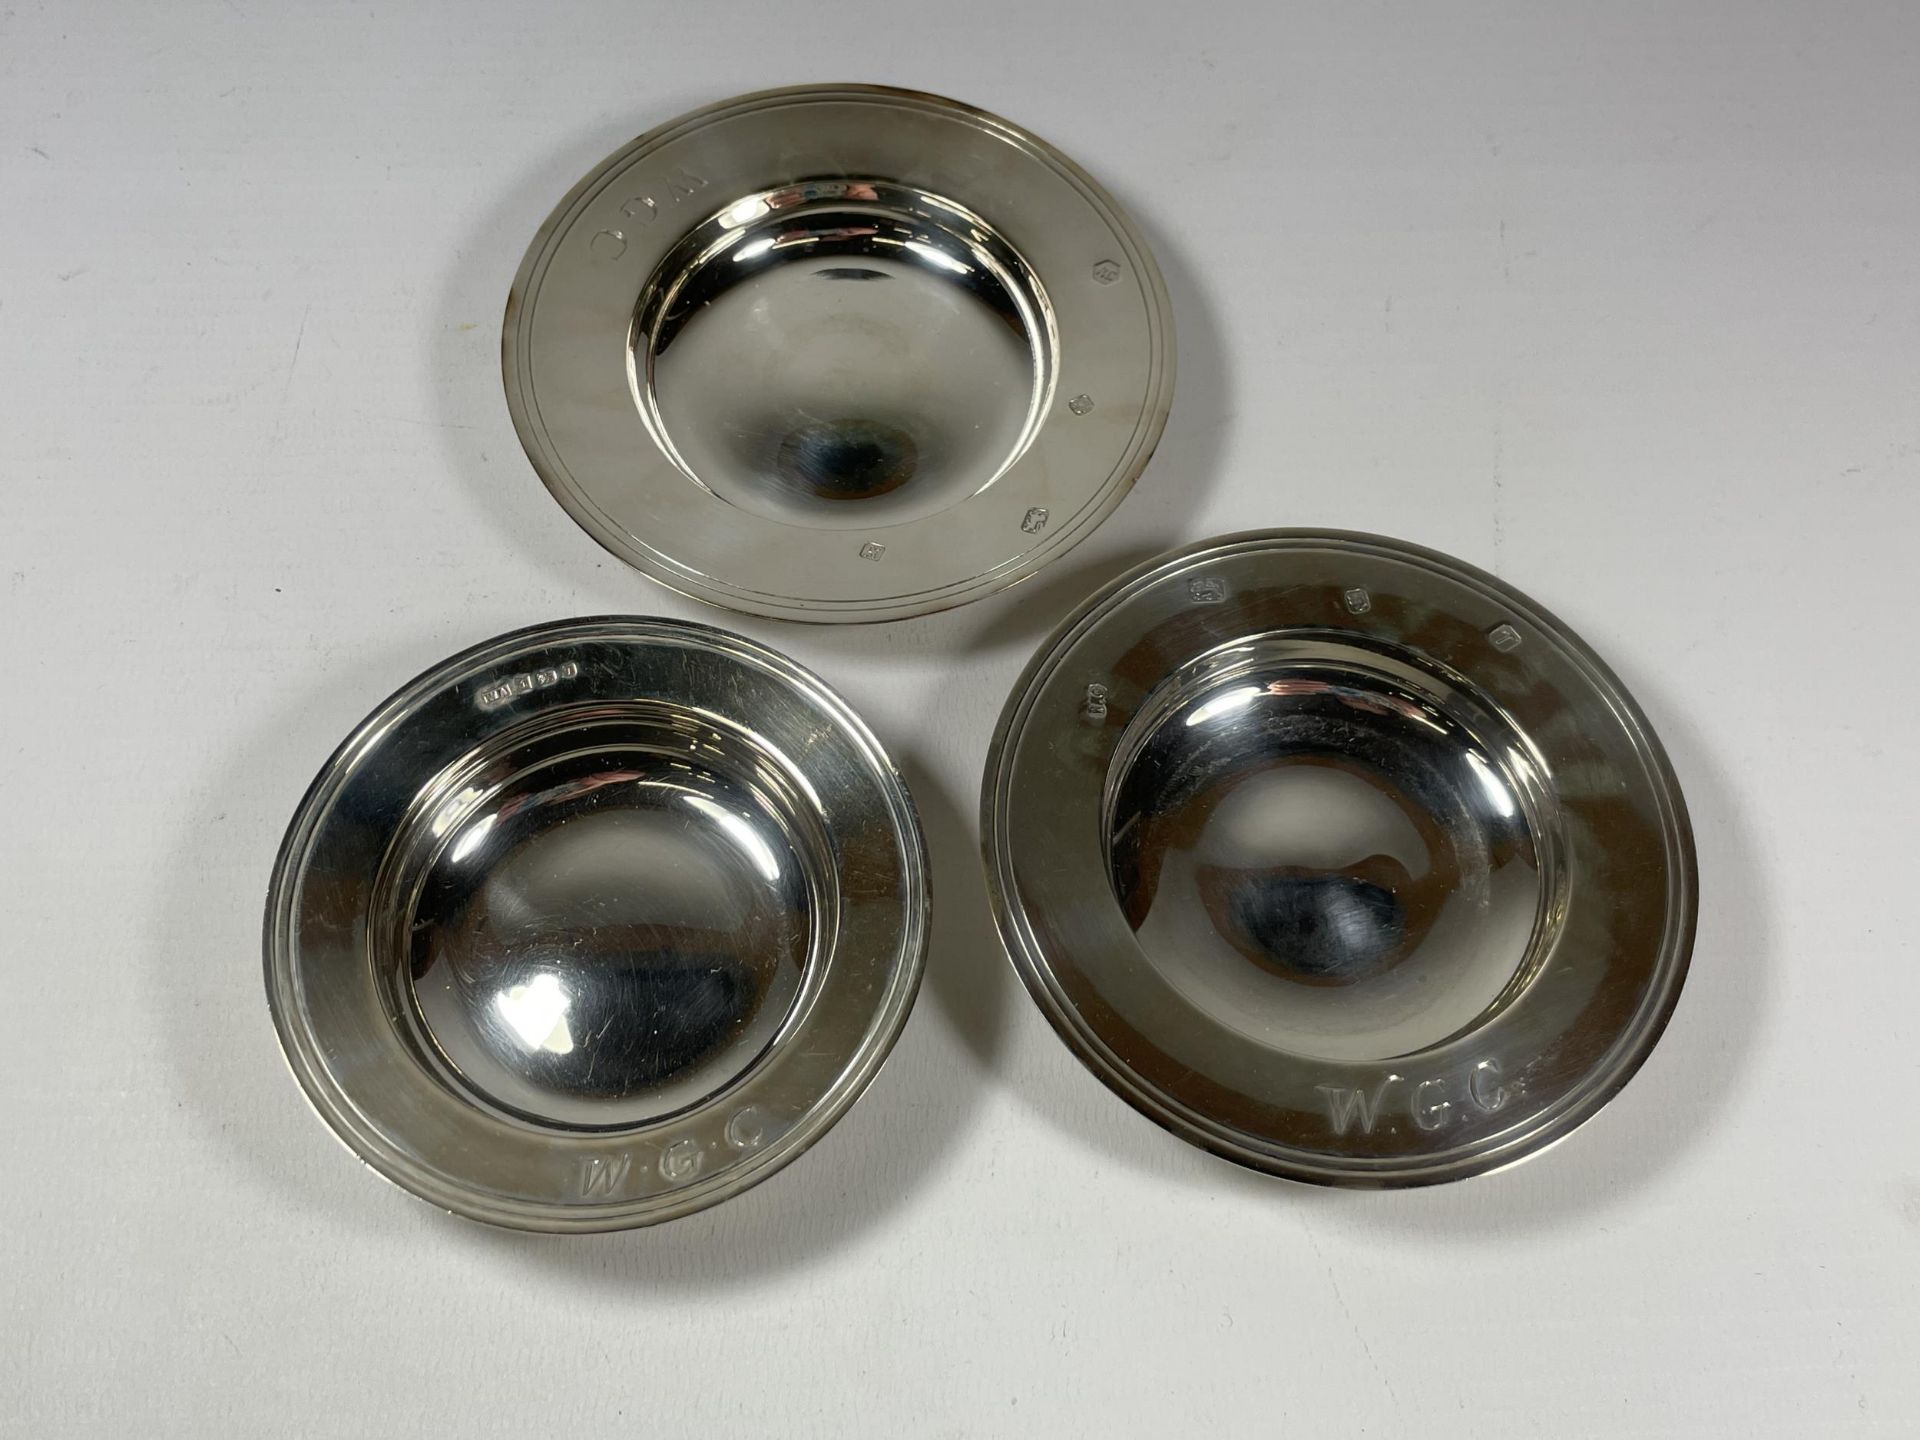 A SET OF THREE HALLMARKED SILVER DISHES MARKED 'W.G.C' BELIEVED FOR WILMSLOW GOLF CLUB, TOTAL WEIGHT